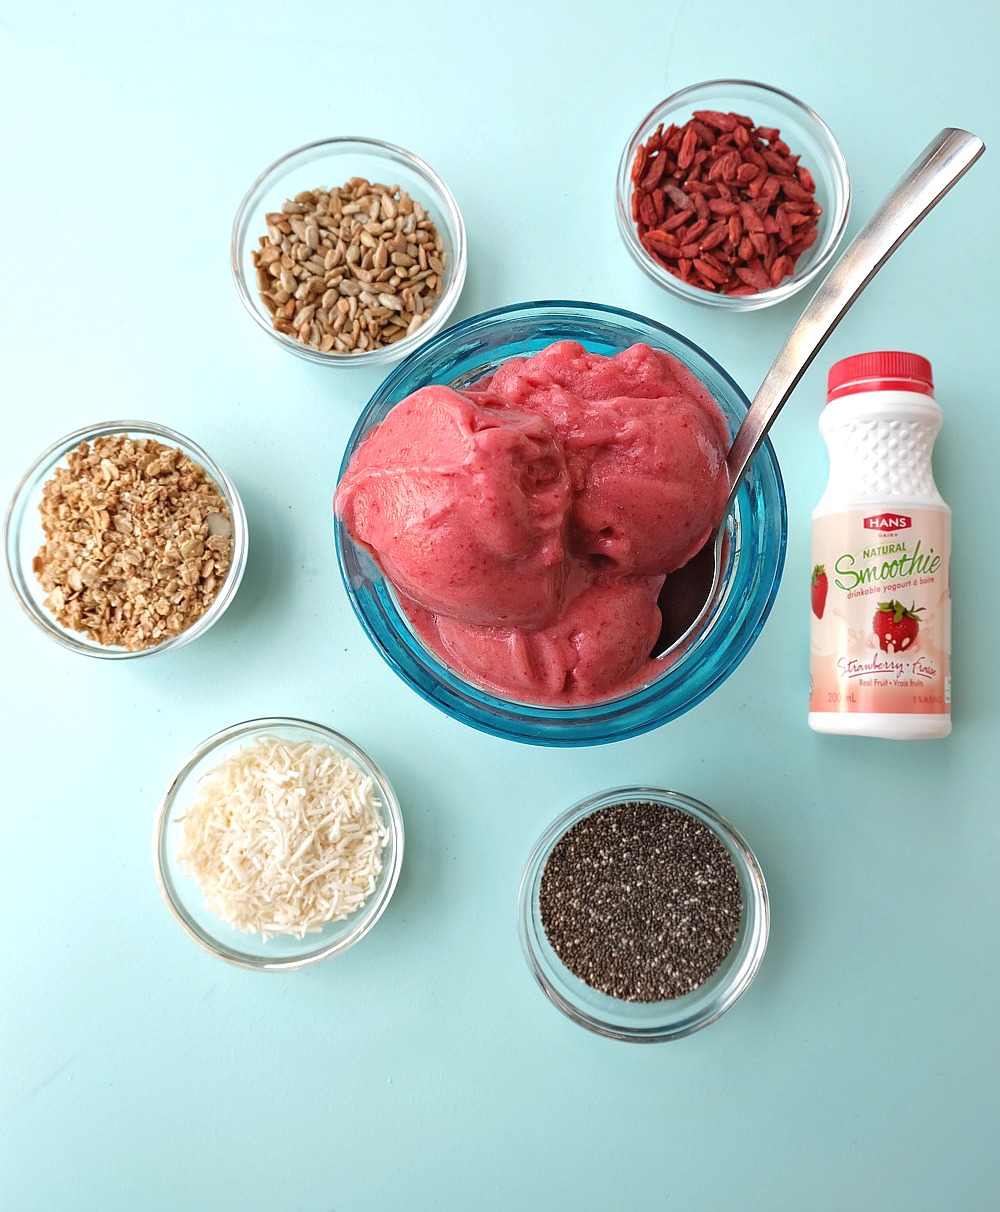 This healthy 2 ingredient no churn frozen yogurt recipe is seriously THE BEST! It takes less than 5 minutes to make and kids love it! Pair it with delicious toppings for a frozen yogurt breakfast parfait smoothie bowl! Quick, easy. healthy and perfect for busy school mornings! 